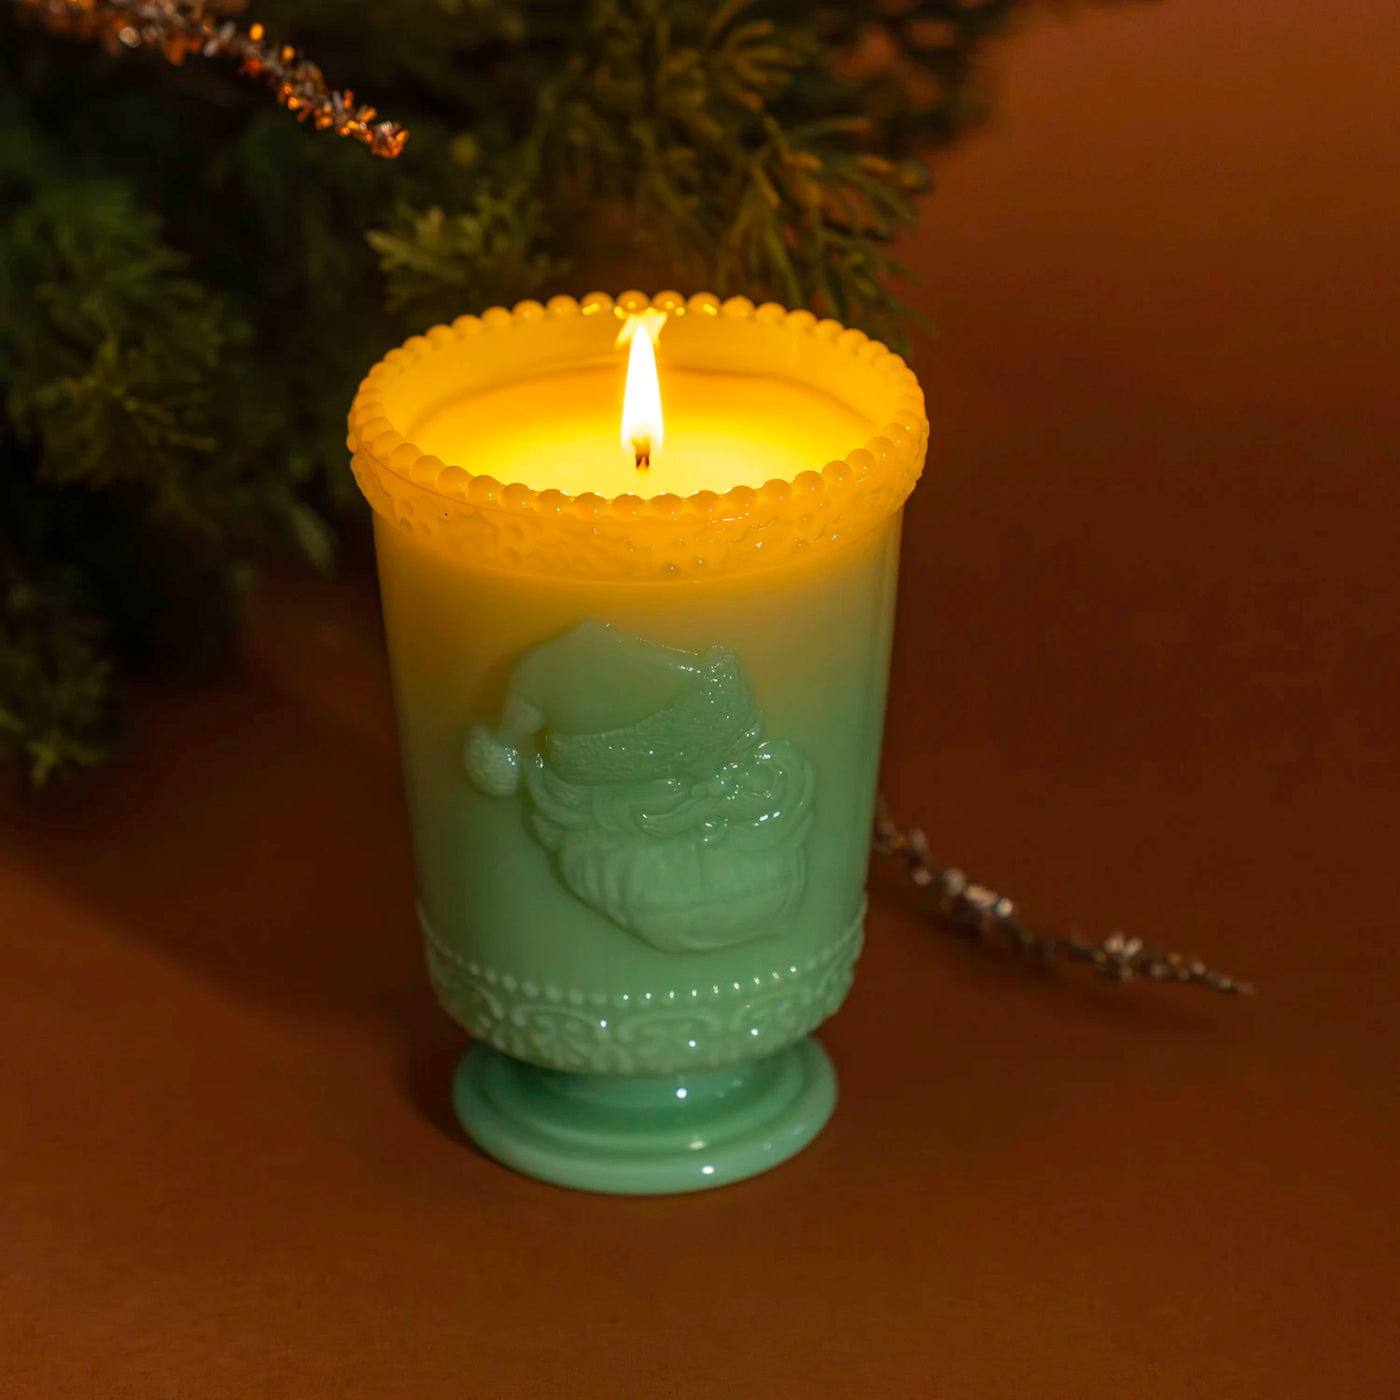 Special Edition Christmas Eve Candle